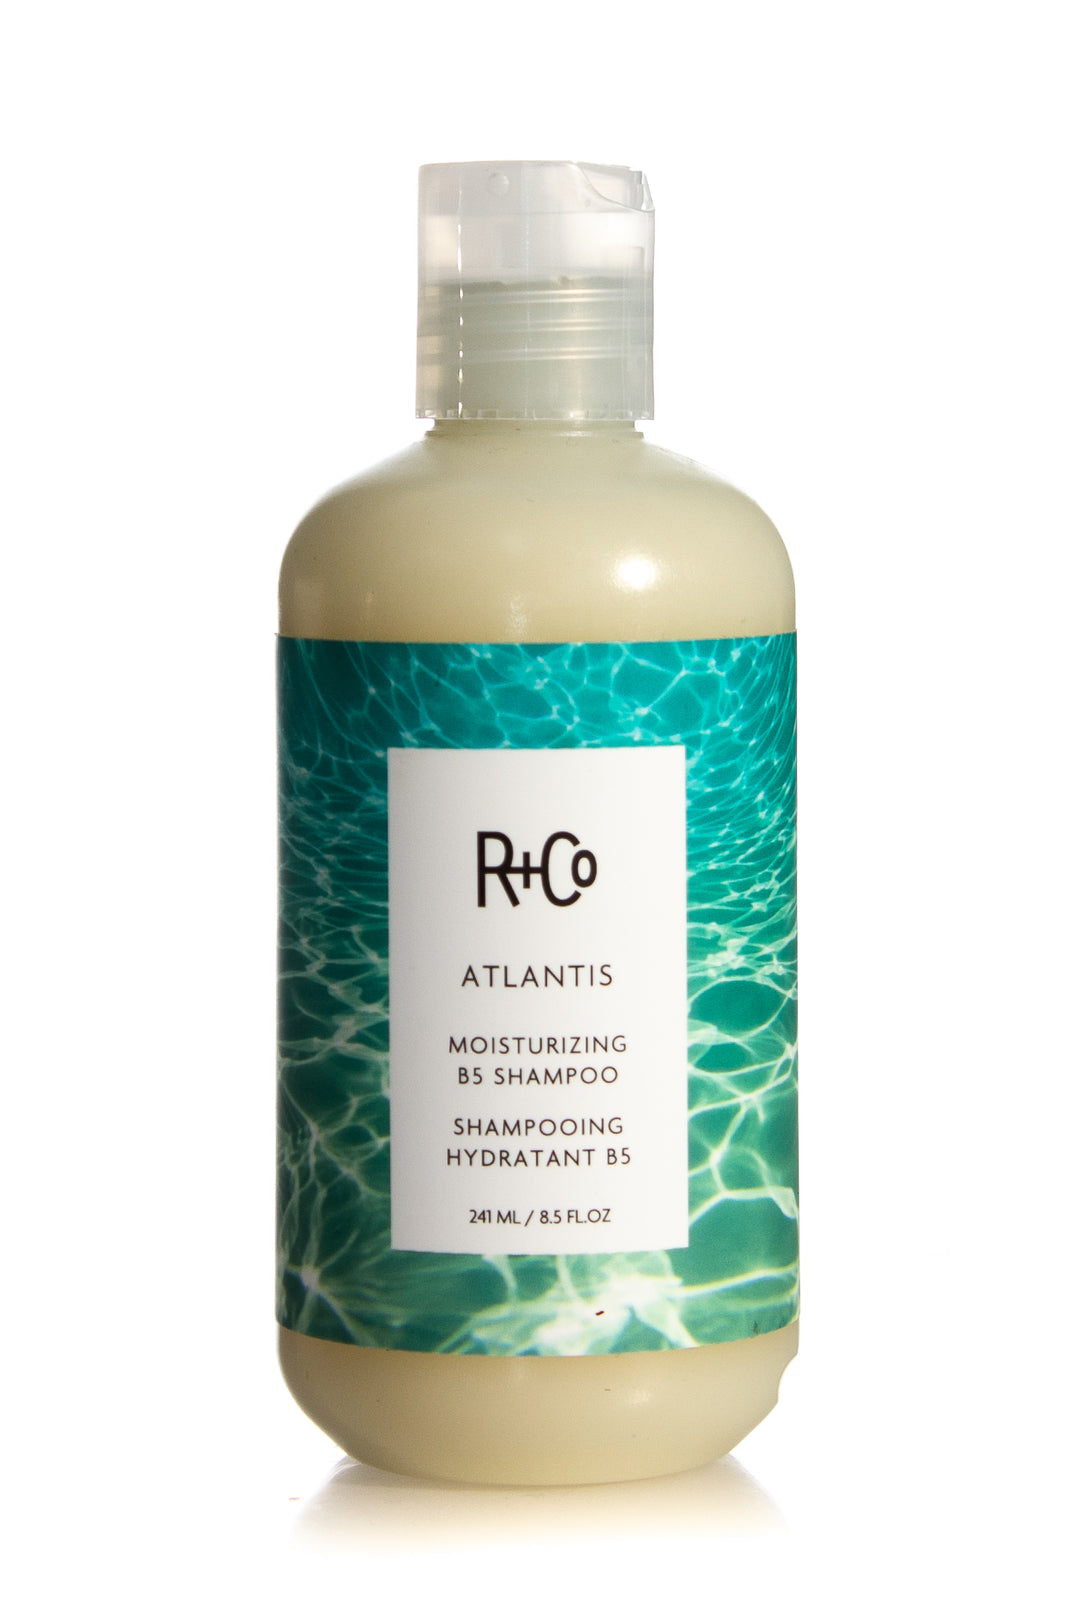 Immerse yourself in moisture and shine with ATLANTIS. This super-hydrating shampoo brings dry and tired hair back to life while countering the effects of sun, coloring, and blow-drying.